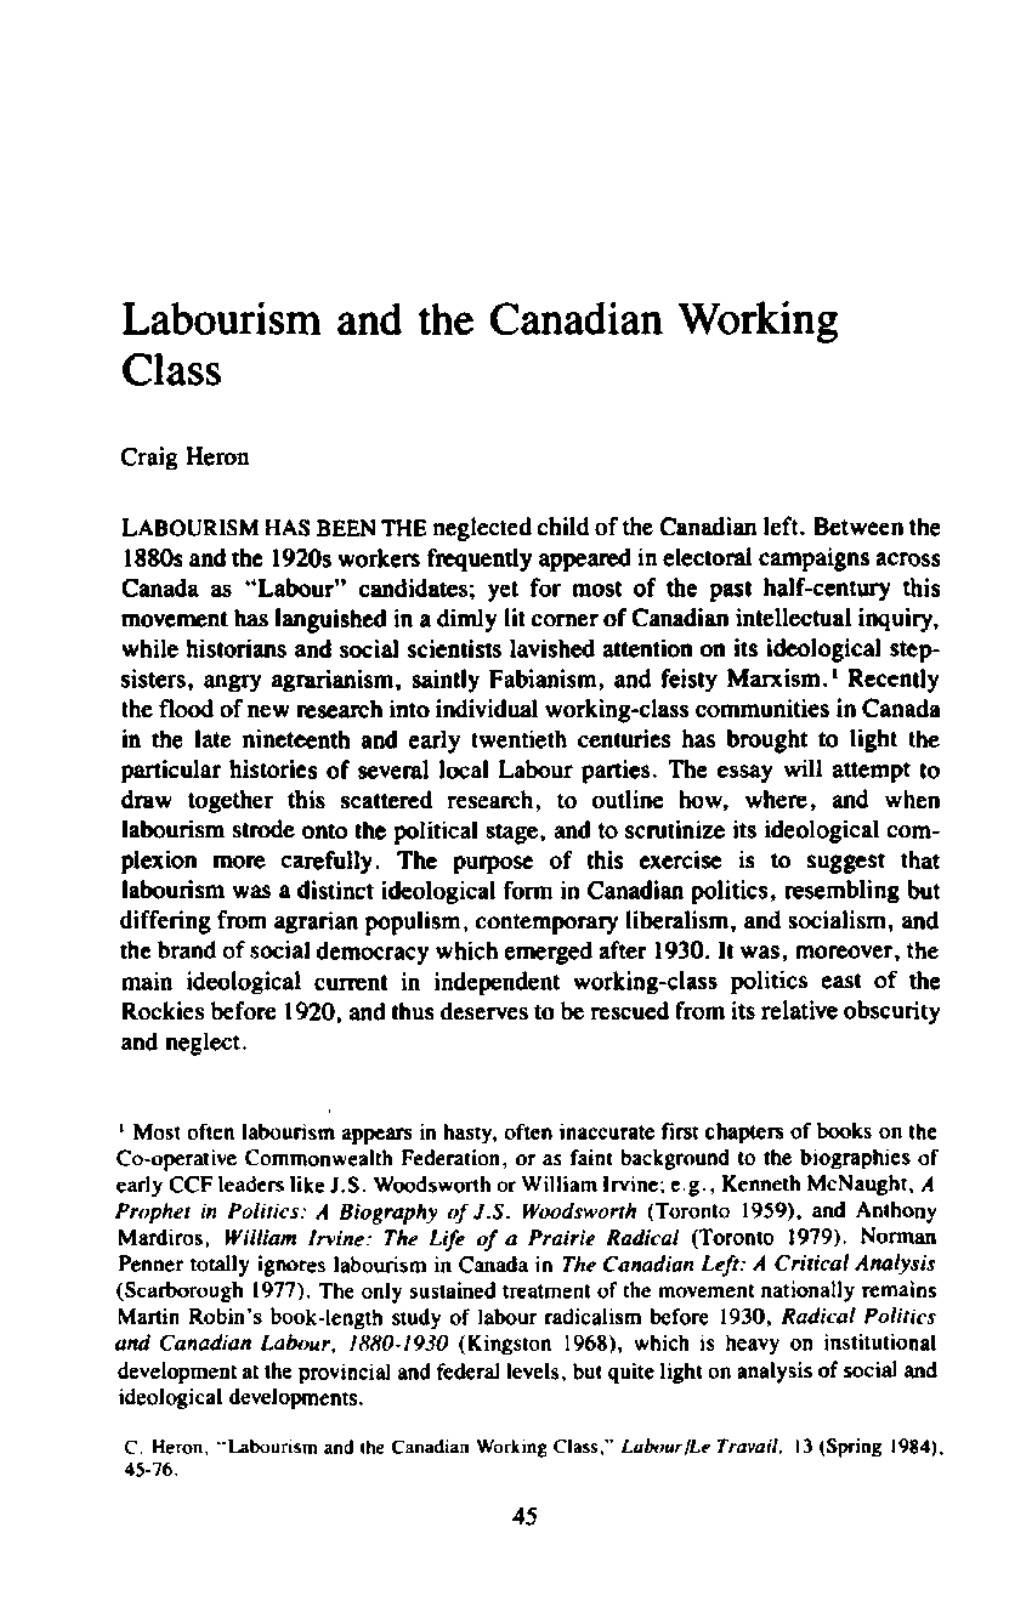 Labourism and the Canadian Working Class